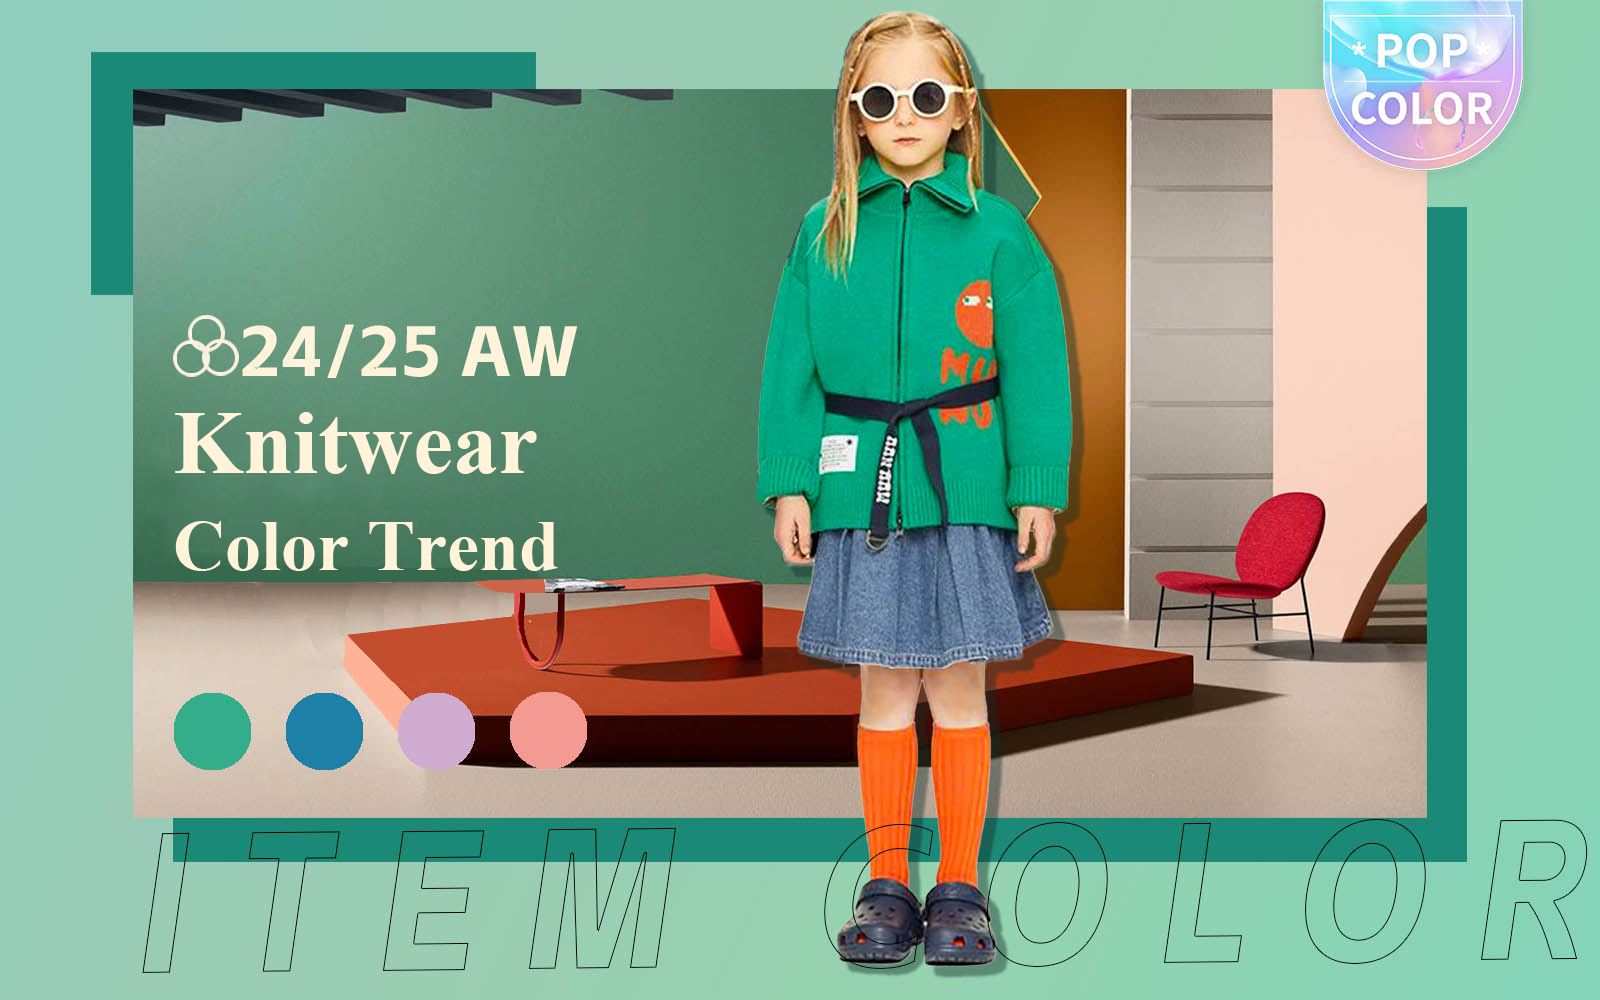 Knitwear -- The Color Trend for Girlswear